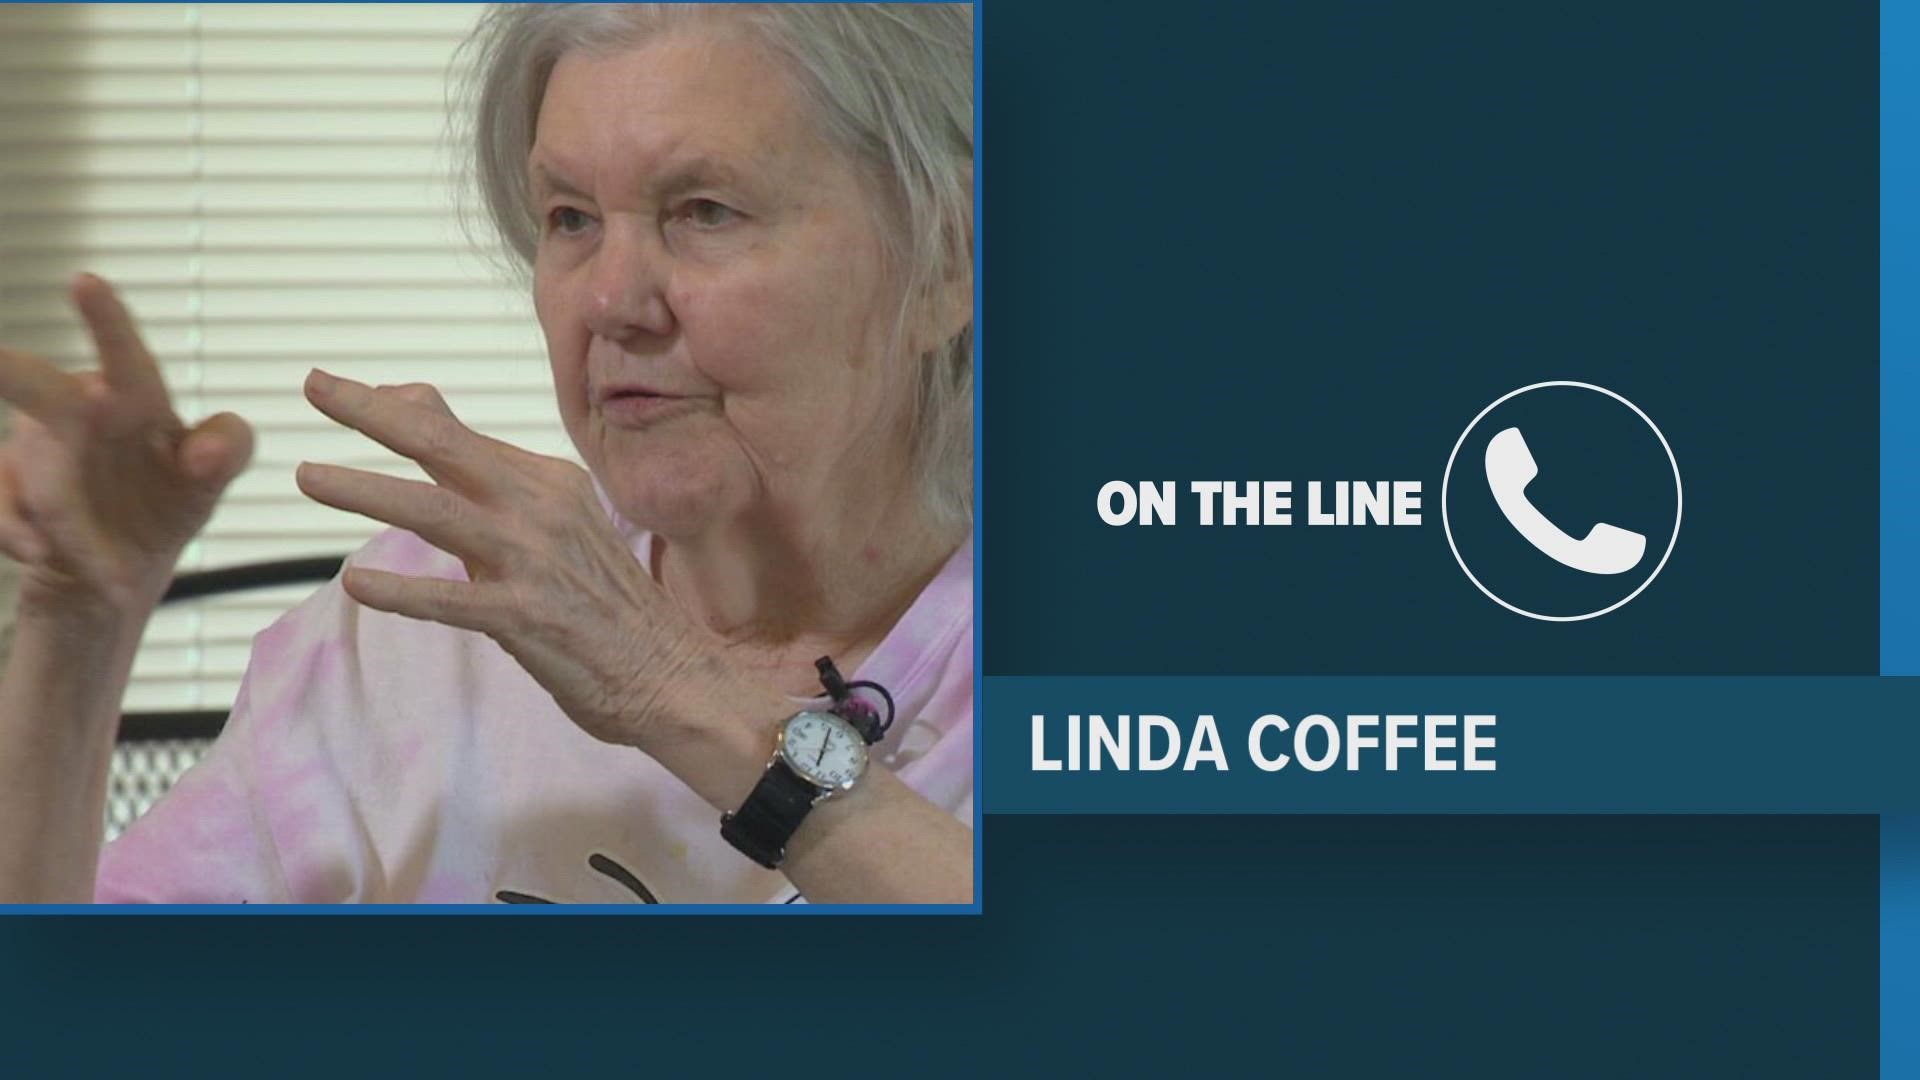 Linda Coffee, who paid the $15 to file the initial Roe v. Wade case and helped usher its through to the Supreme Court, reacts to SCOTUS overturning its decision